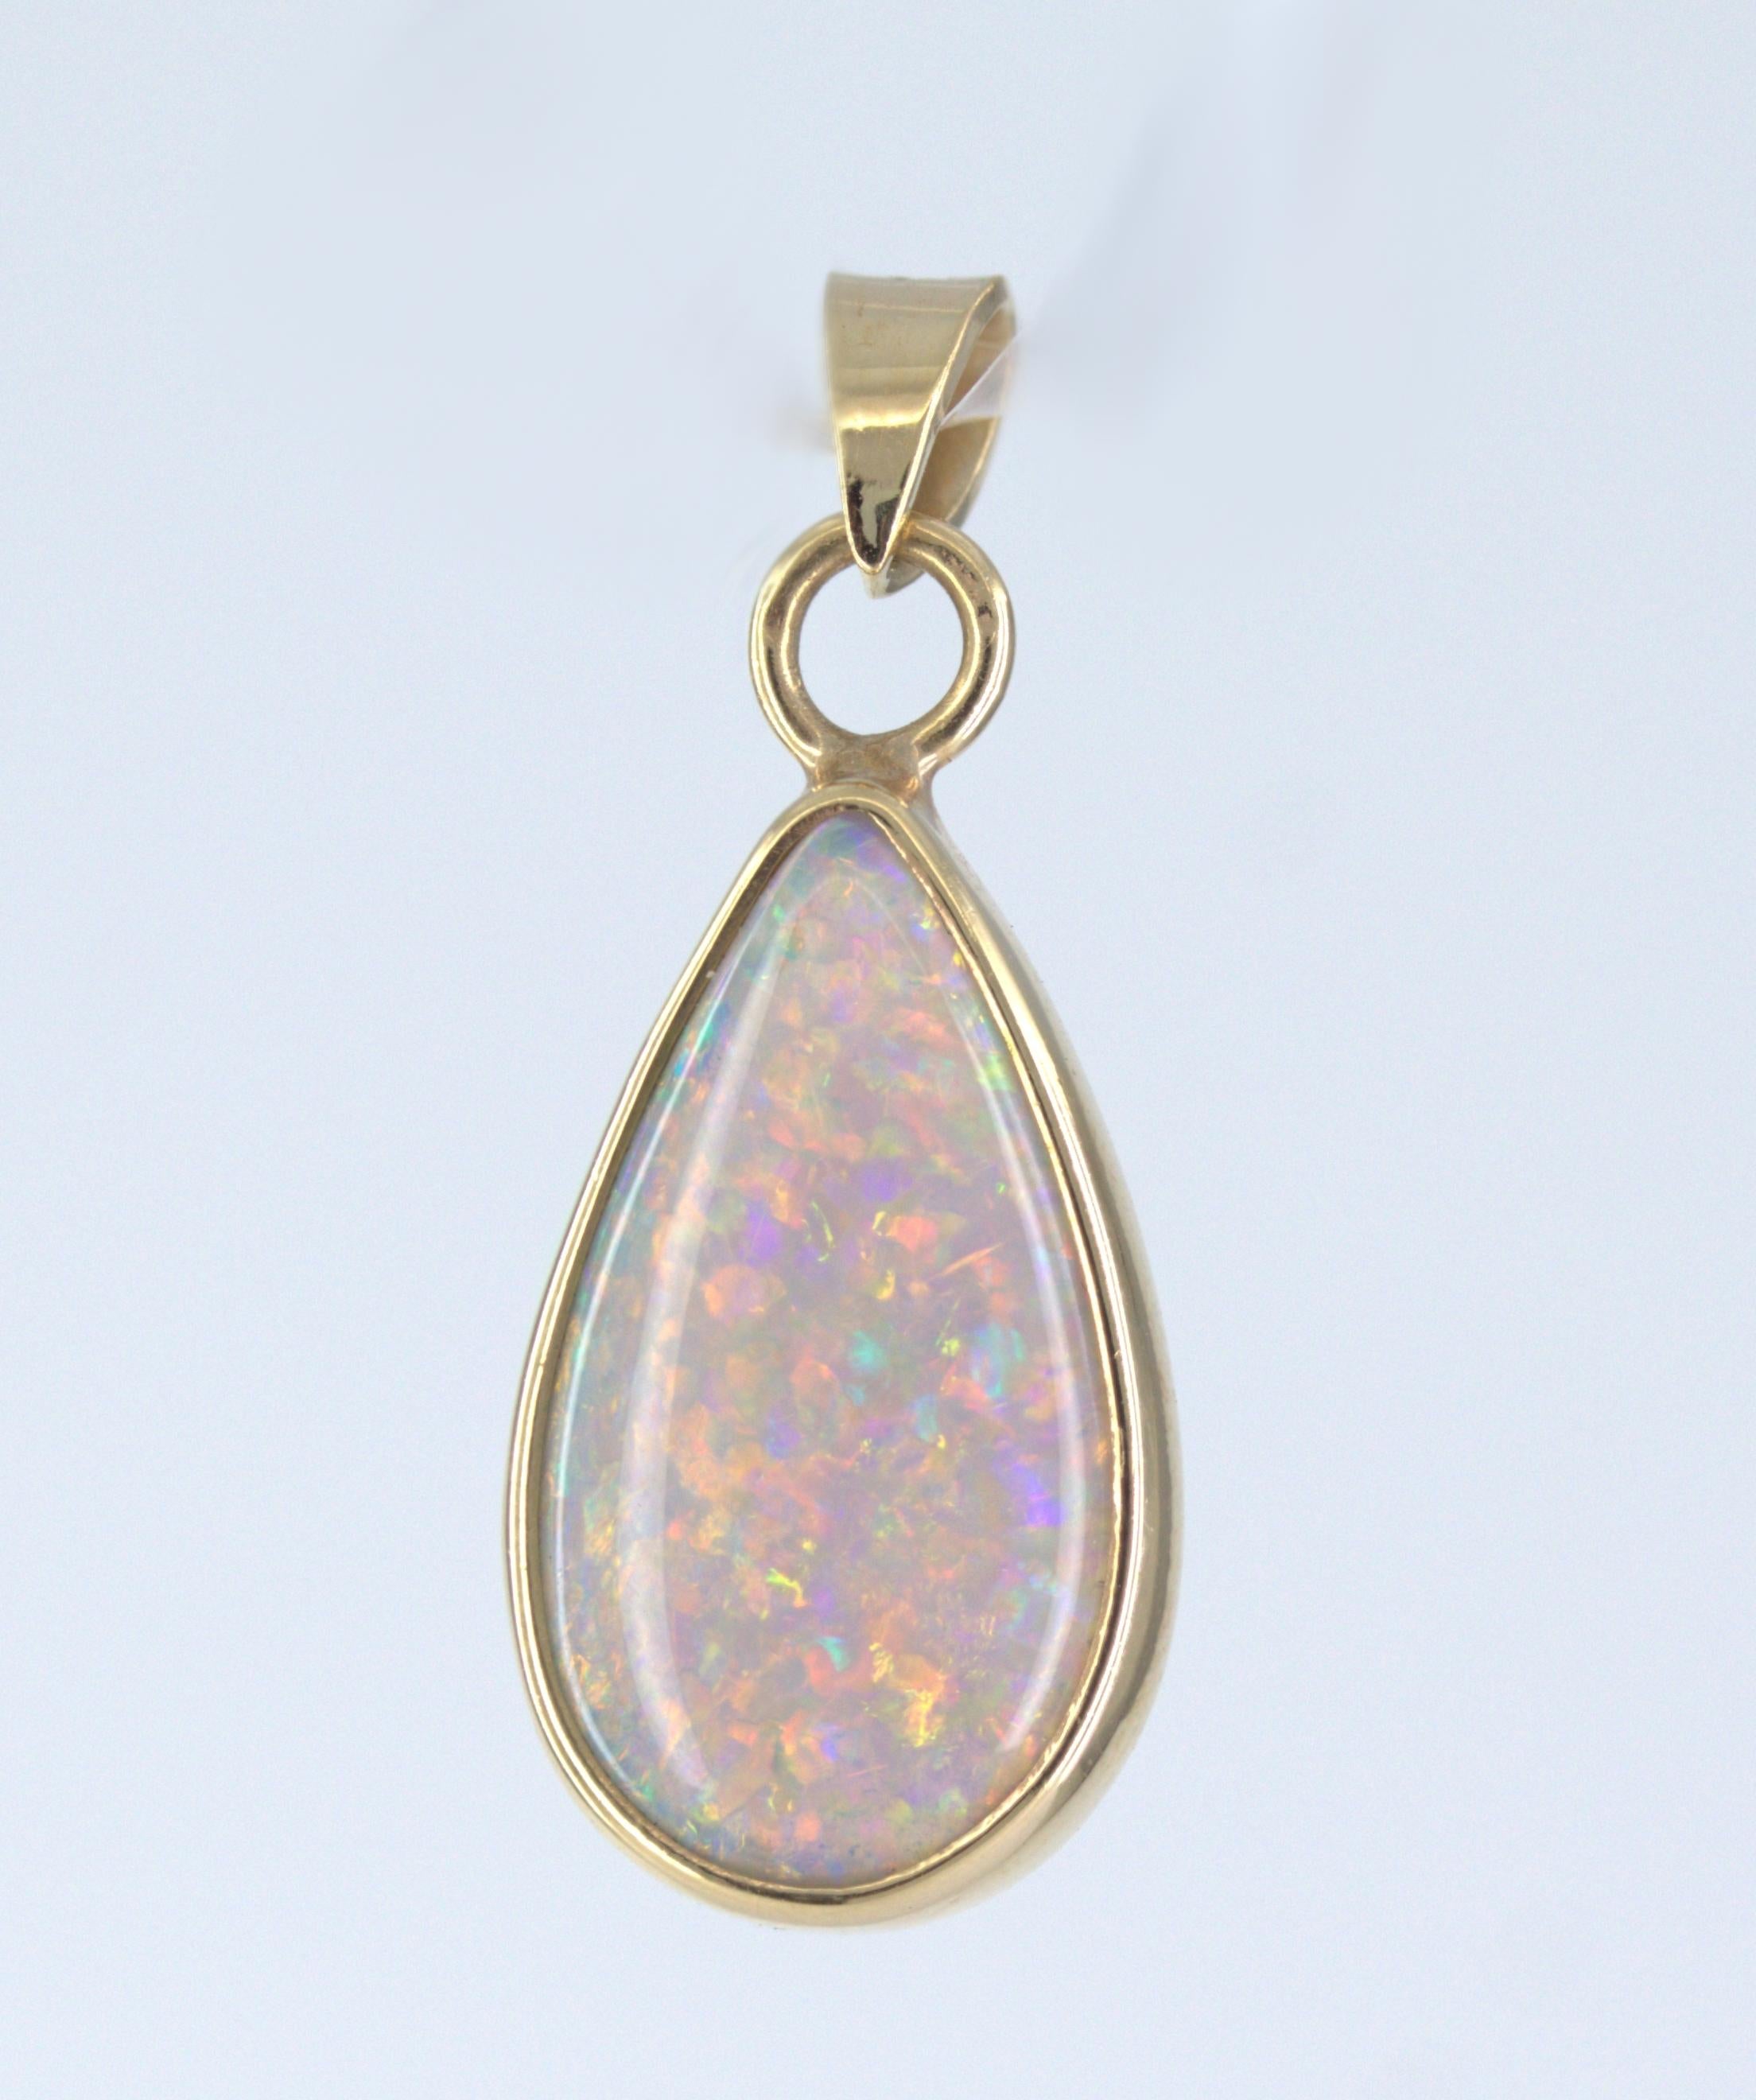 Featuring (1) beautiful pear-shaped grey crystal opal, with play of colors from red to orange and blue to green, in a floral harlequin pattern throughout, 15 X 8 X 3 mm, bezel set in a 14k yellow gold mounting, 22.4 X 9.7 X 3.3 mm, with articulated